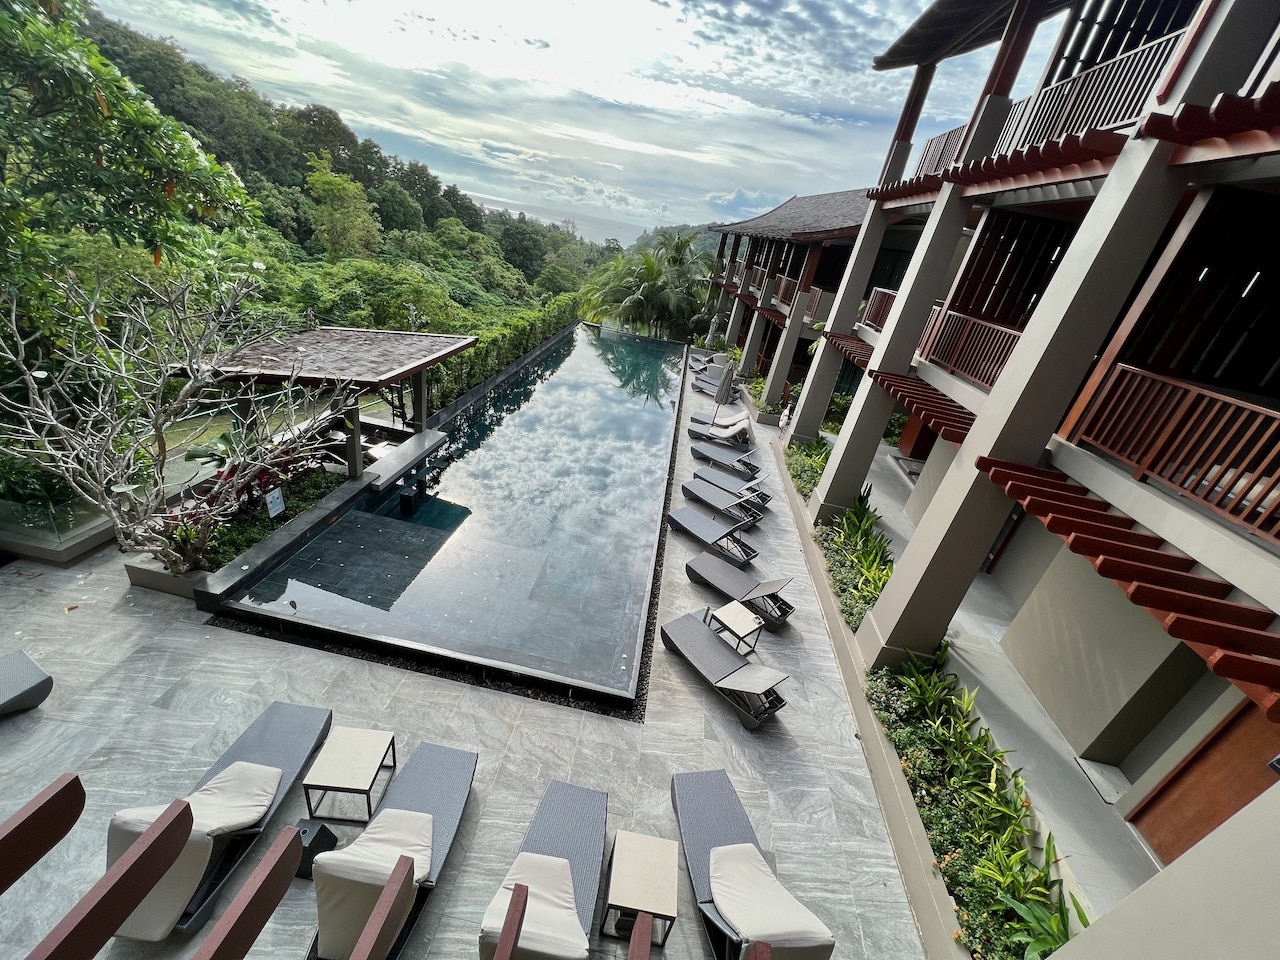 Avista Hideaway Phuket MGallery Resort has 3 pools. This is the quiet adults-only pool surrounded by lush jungle.